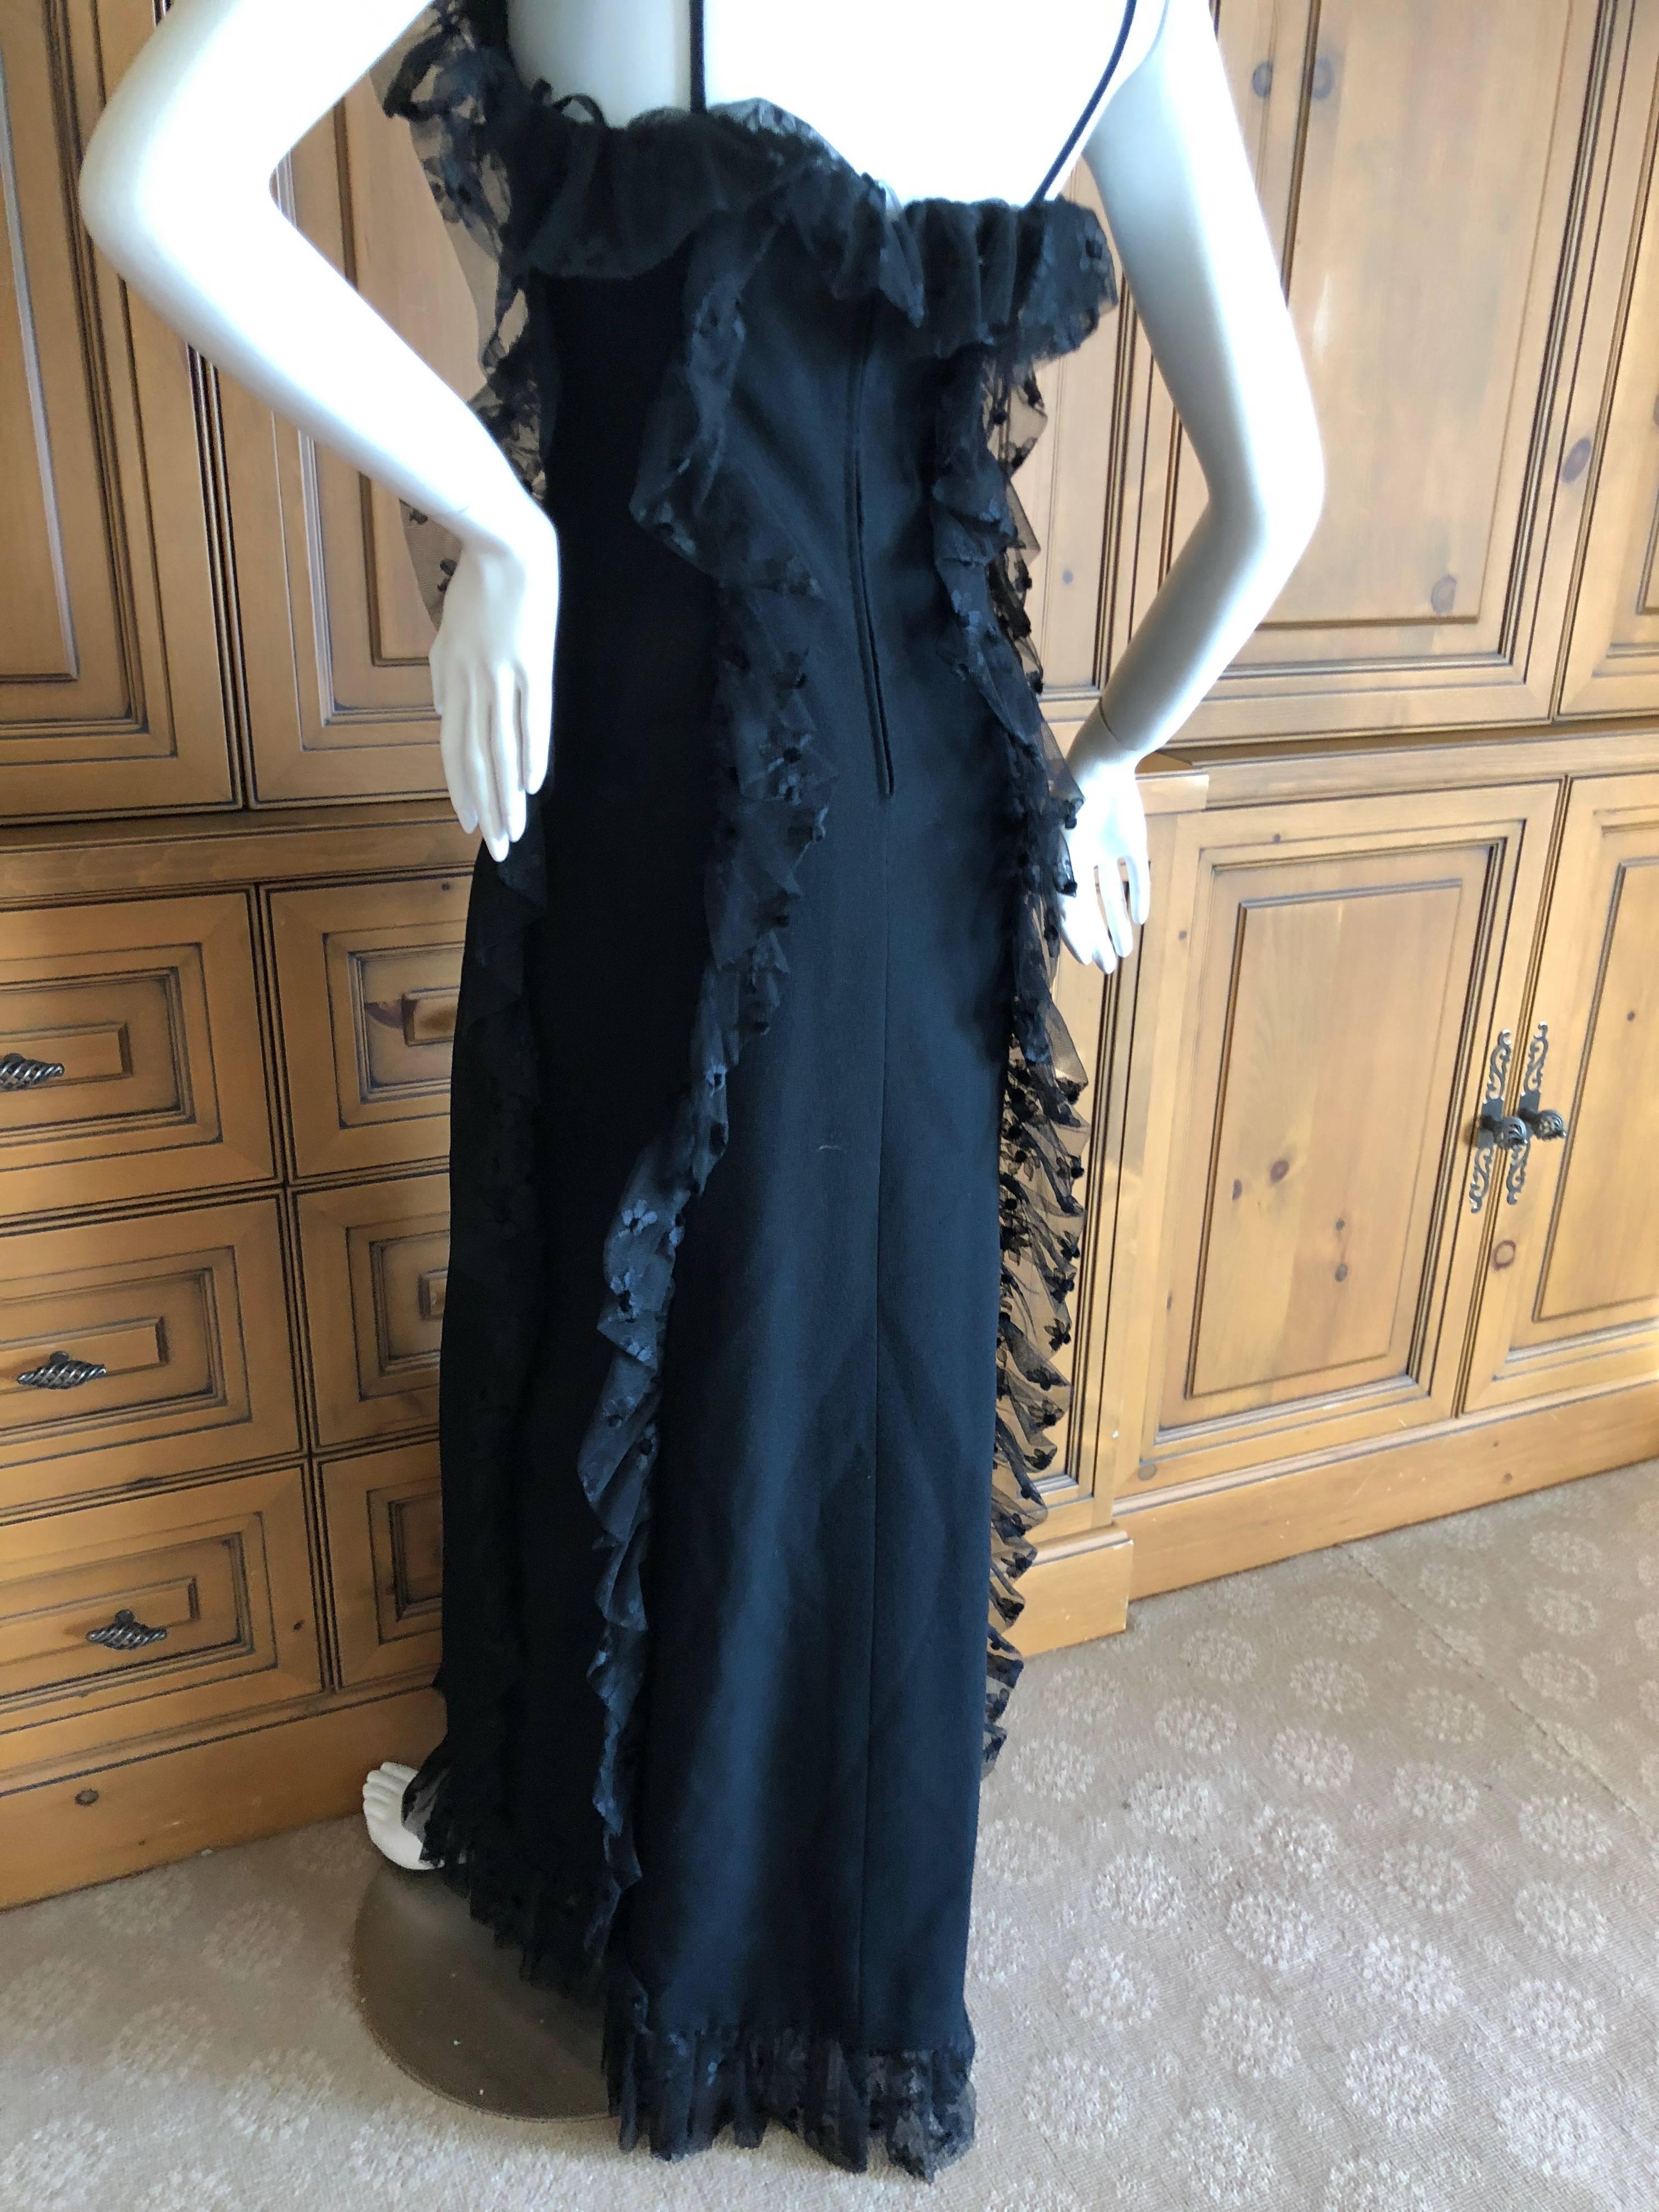 Cardinali Spring 1974 Black Ruffle Lace Trim Evening Gown For Sale 6